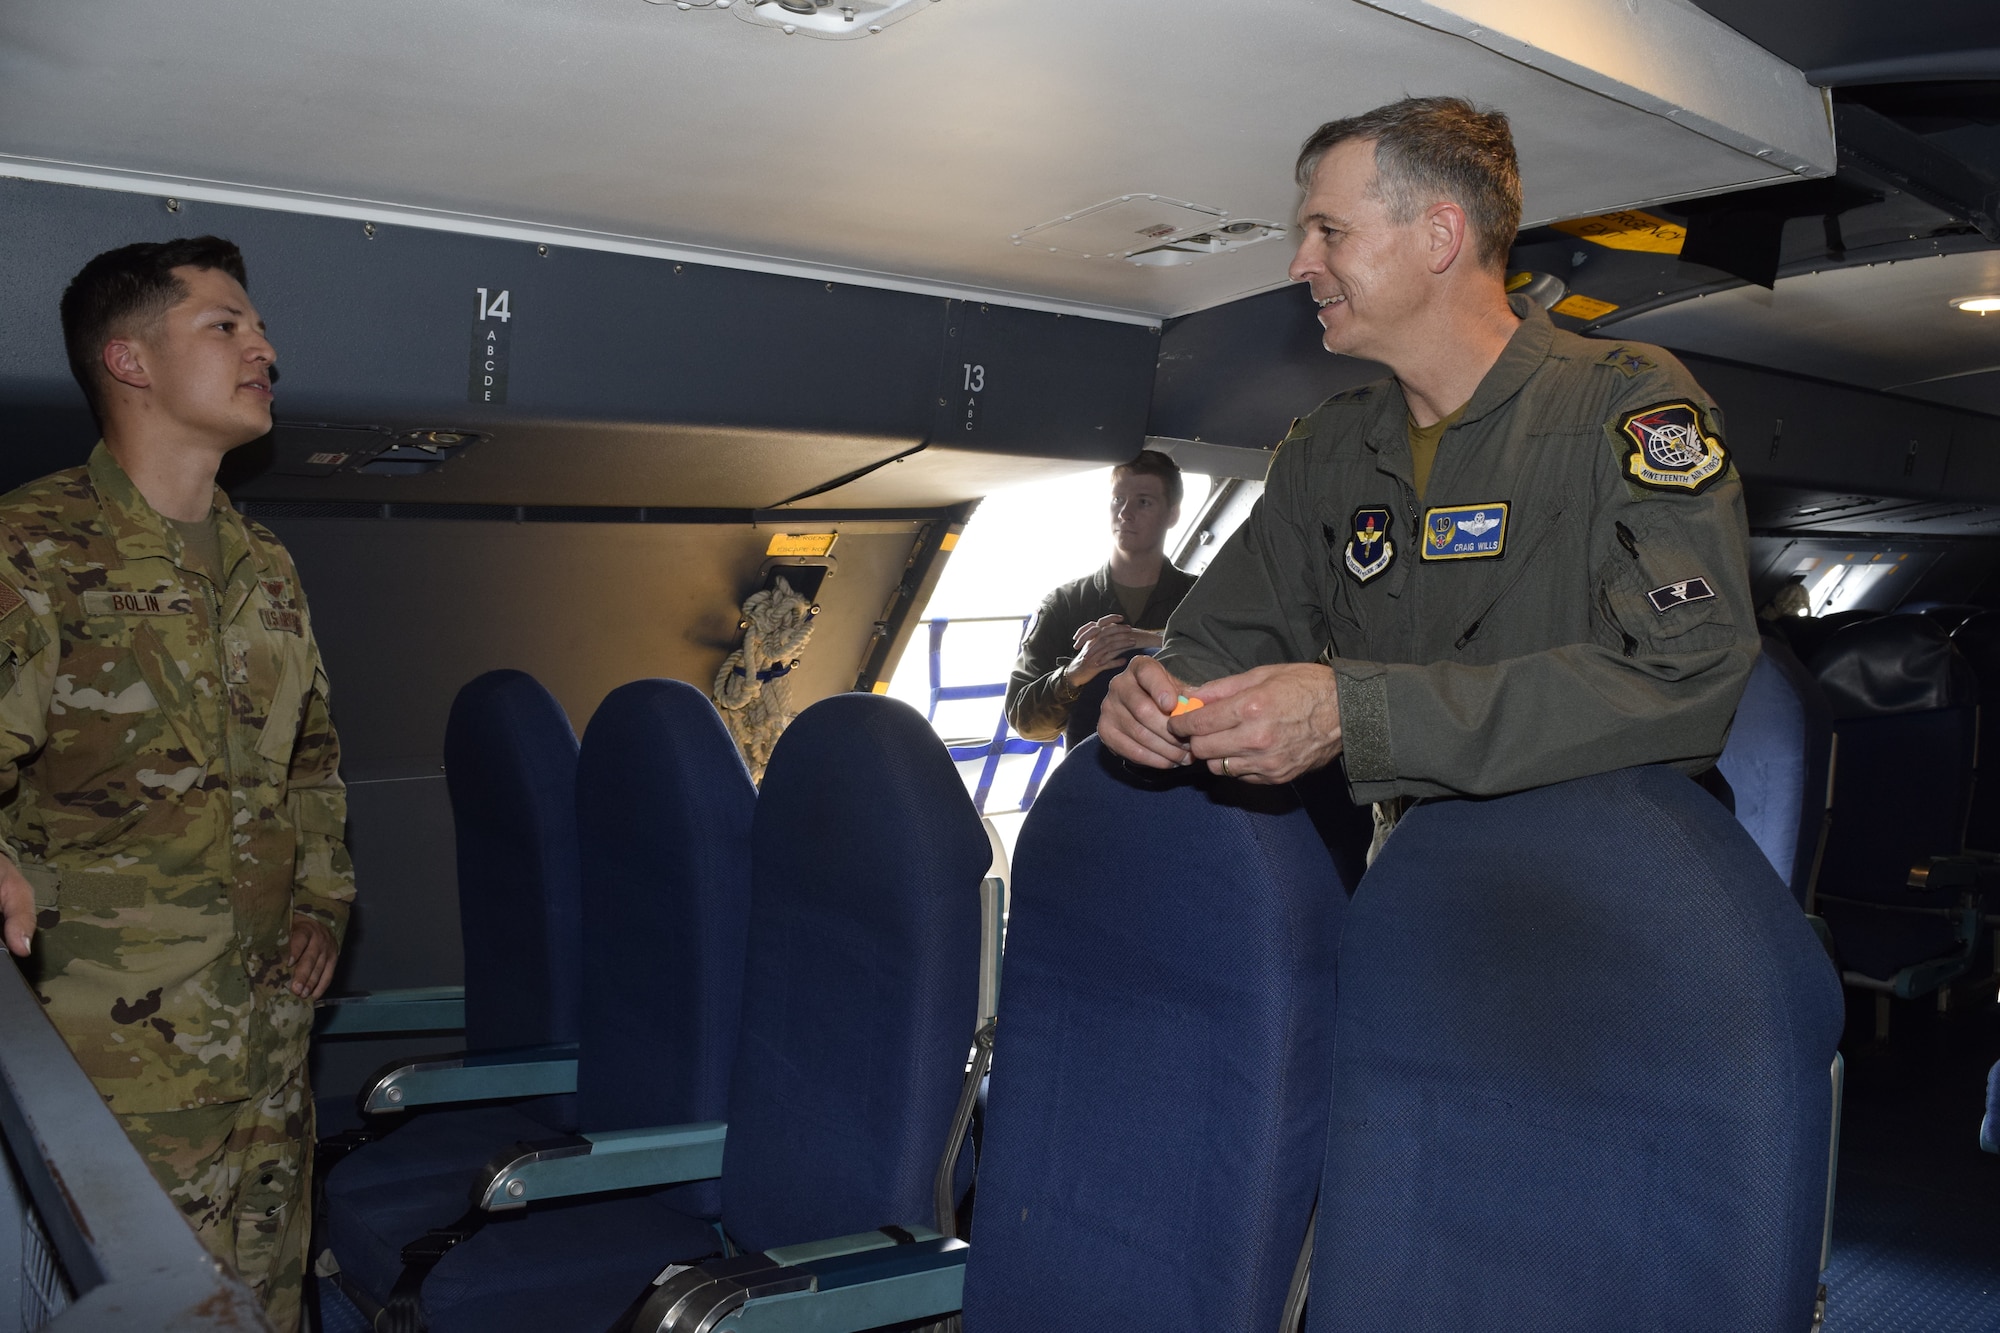 Tech. Sgt. Brent Bolin, 68th Airlift Squadron loadmaster, talks with Maj. Gen. Craig Wills, 19th Air Force commander, on a C-5M Super Galaxy aircraft at Joint Base-San Antonio-Lackland, Texas, May 21, 2021. Wills met with aircrew members to learn more about the C-5M mission. (U.S. Air Force photo by Senior Airman Brittany Wich)